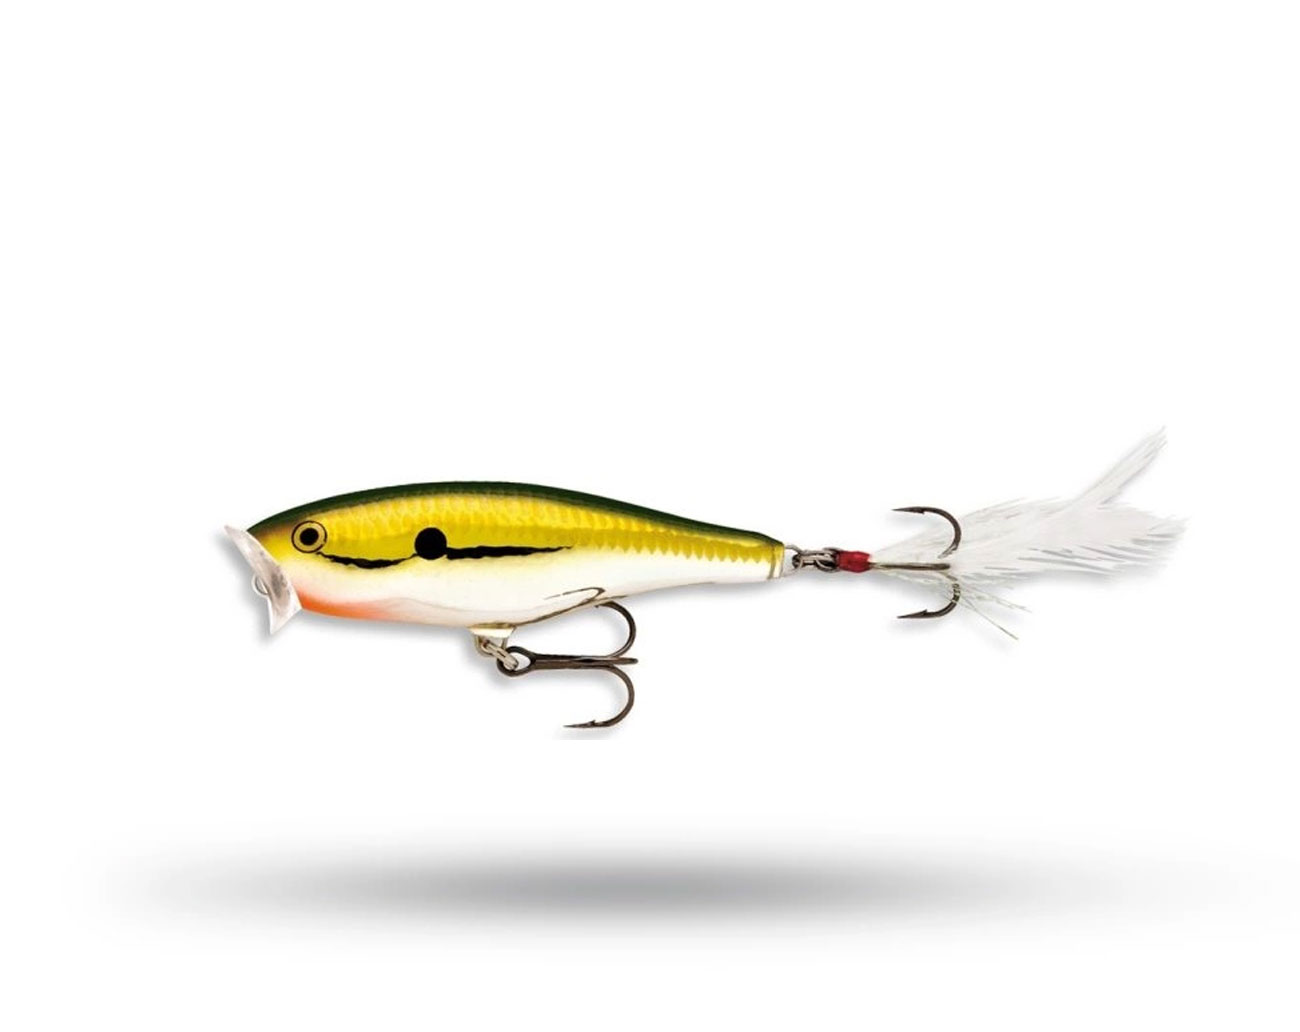 Rapala SKITTER POP SP-5F Frog Combine shipping free 